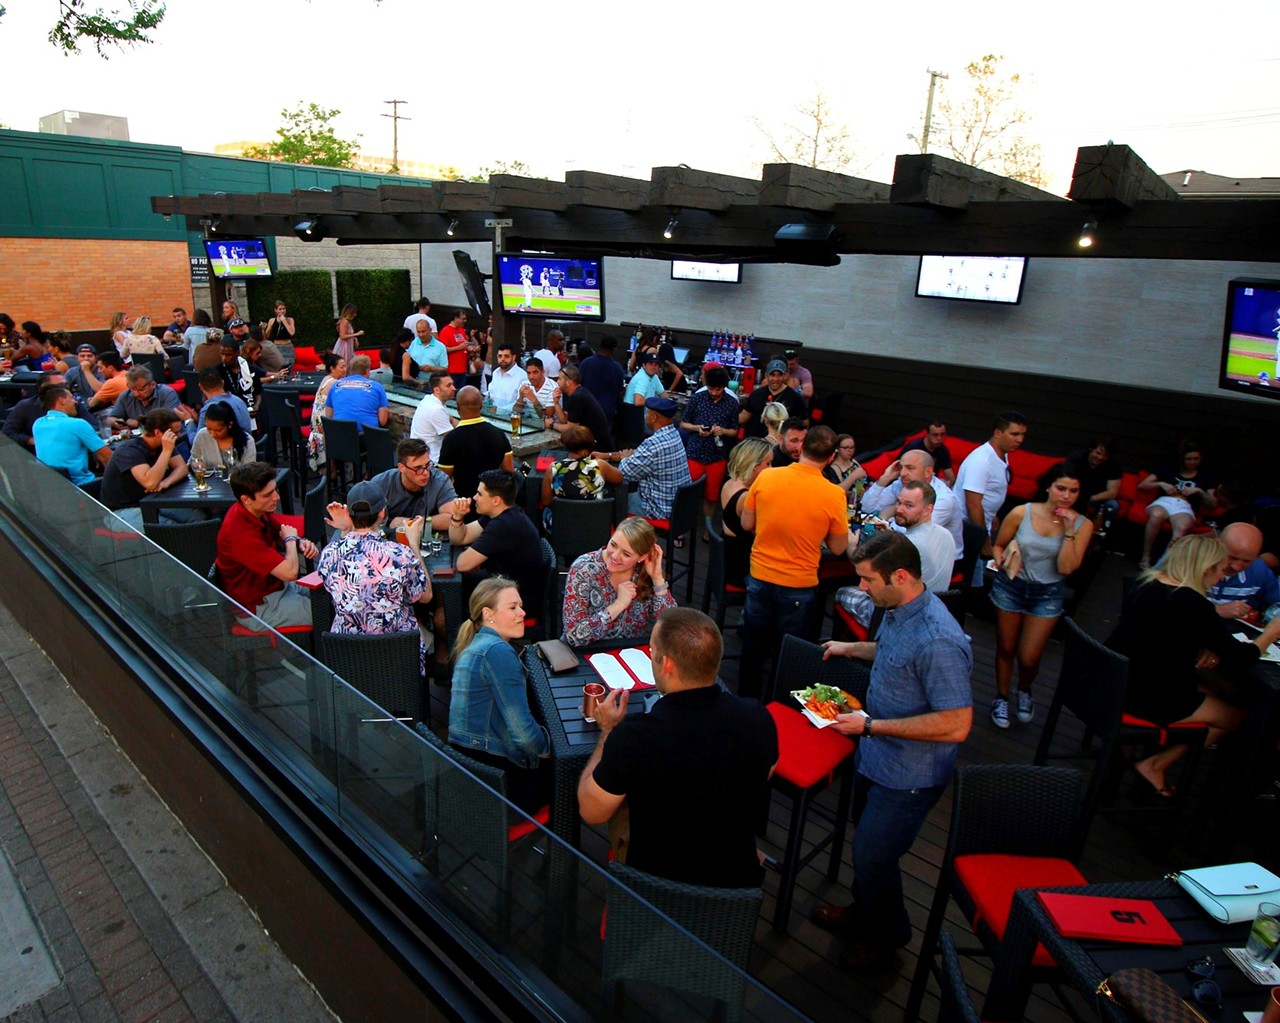 Fifth Avenue
215 W. 5th St., Royal Oak; 248-629-9423; fifthaveroyaloak.com
Fifth Ave’s patio is a popular one, packing in a young crowd in the warmer months.